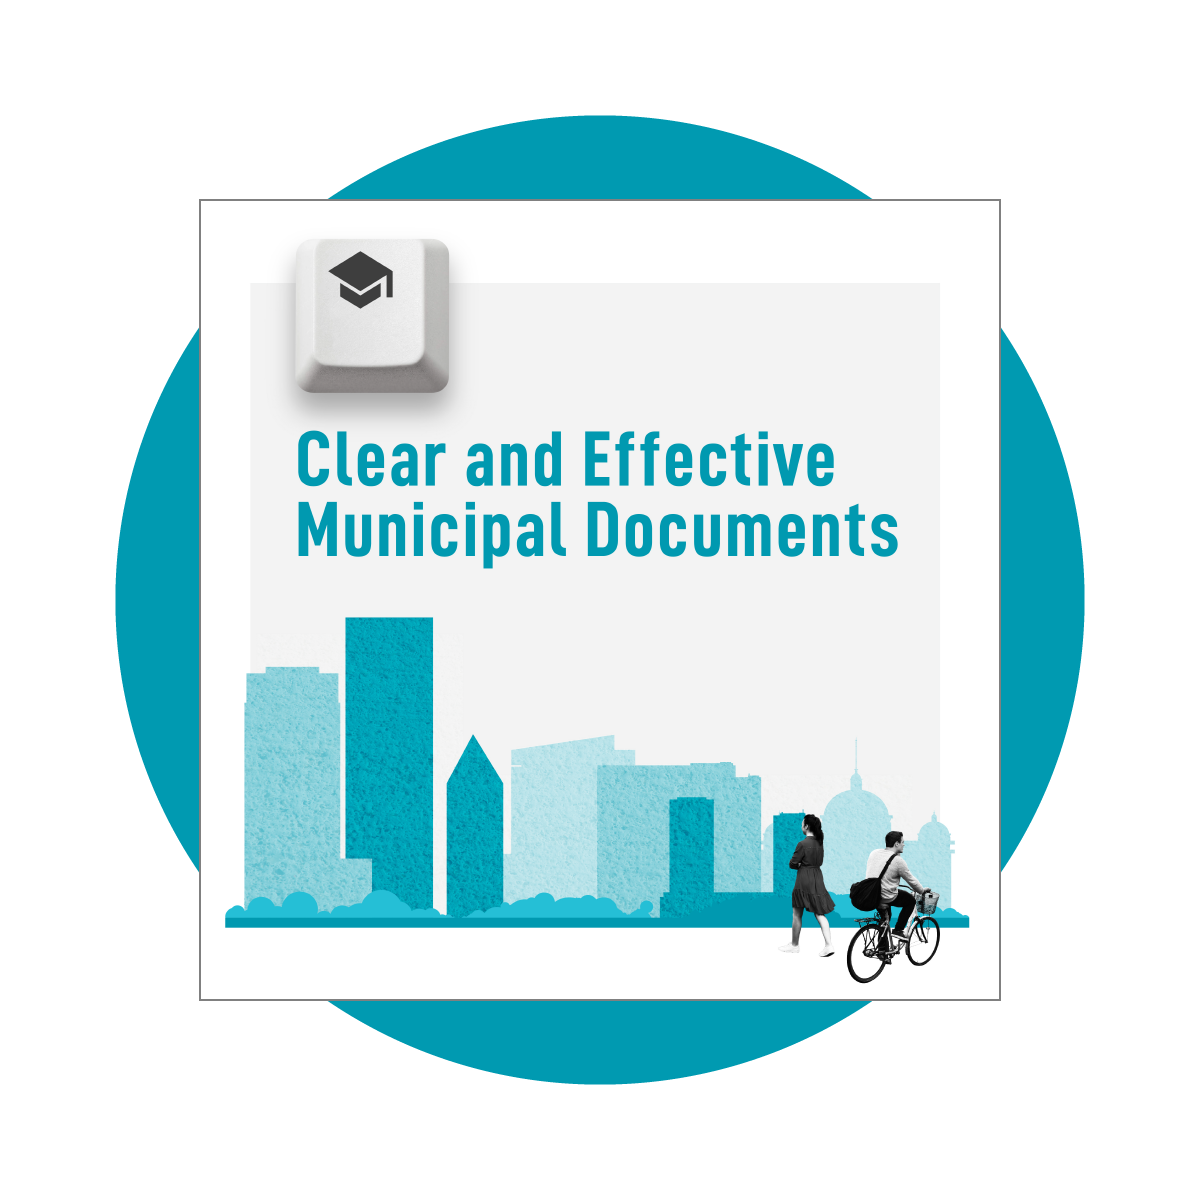 The course page for Clear and Effective Municipal Documents.